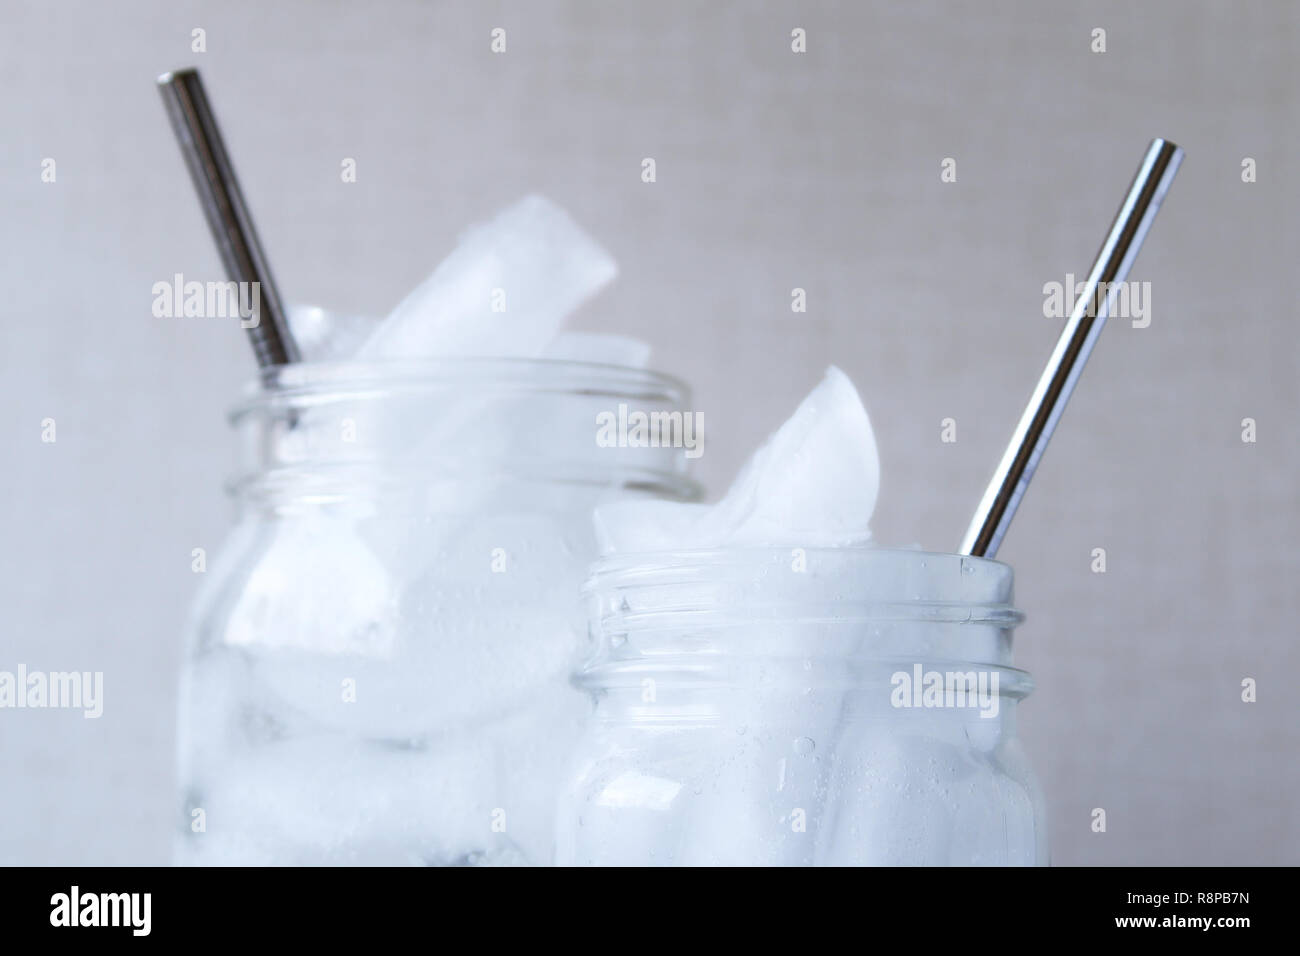 Sustainable resources concept with glass drinking glasses with stainless steel straws. Stock Photo